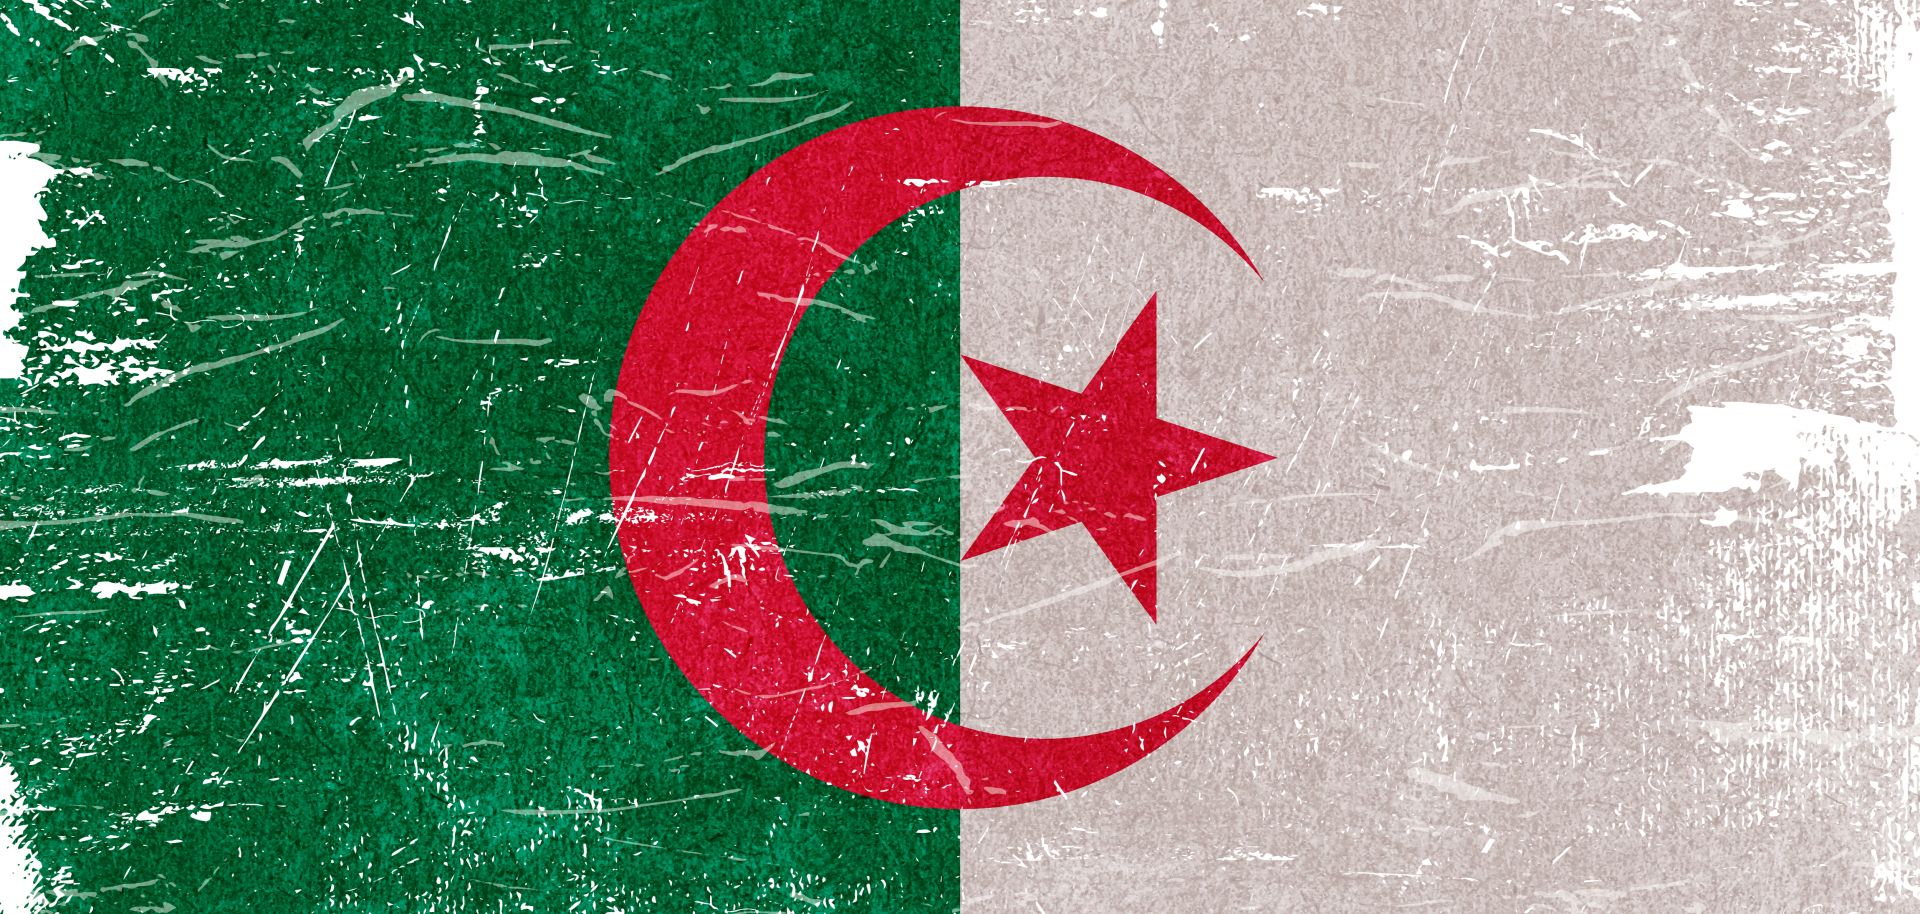 An image of the Algerian flag. Plummeting oil demand and prices due to the COVID-19 crisis have sapped the Algerian government of its primary revenue source.